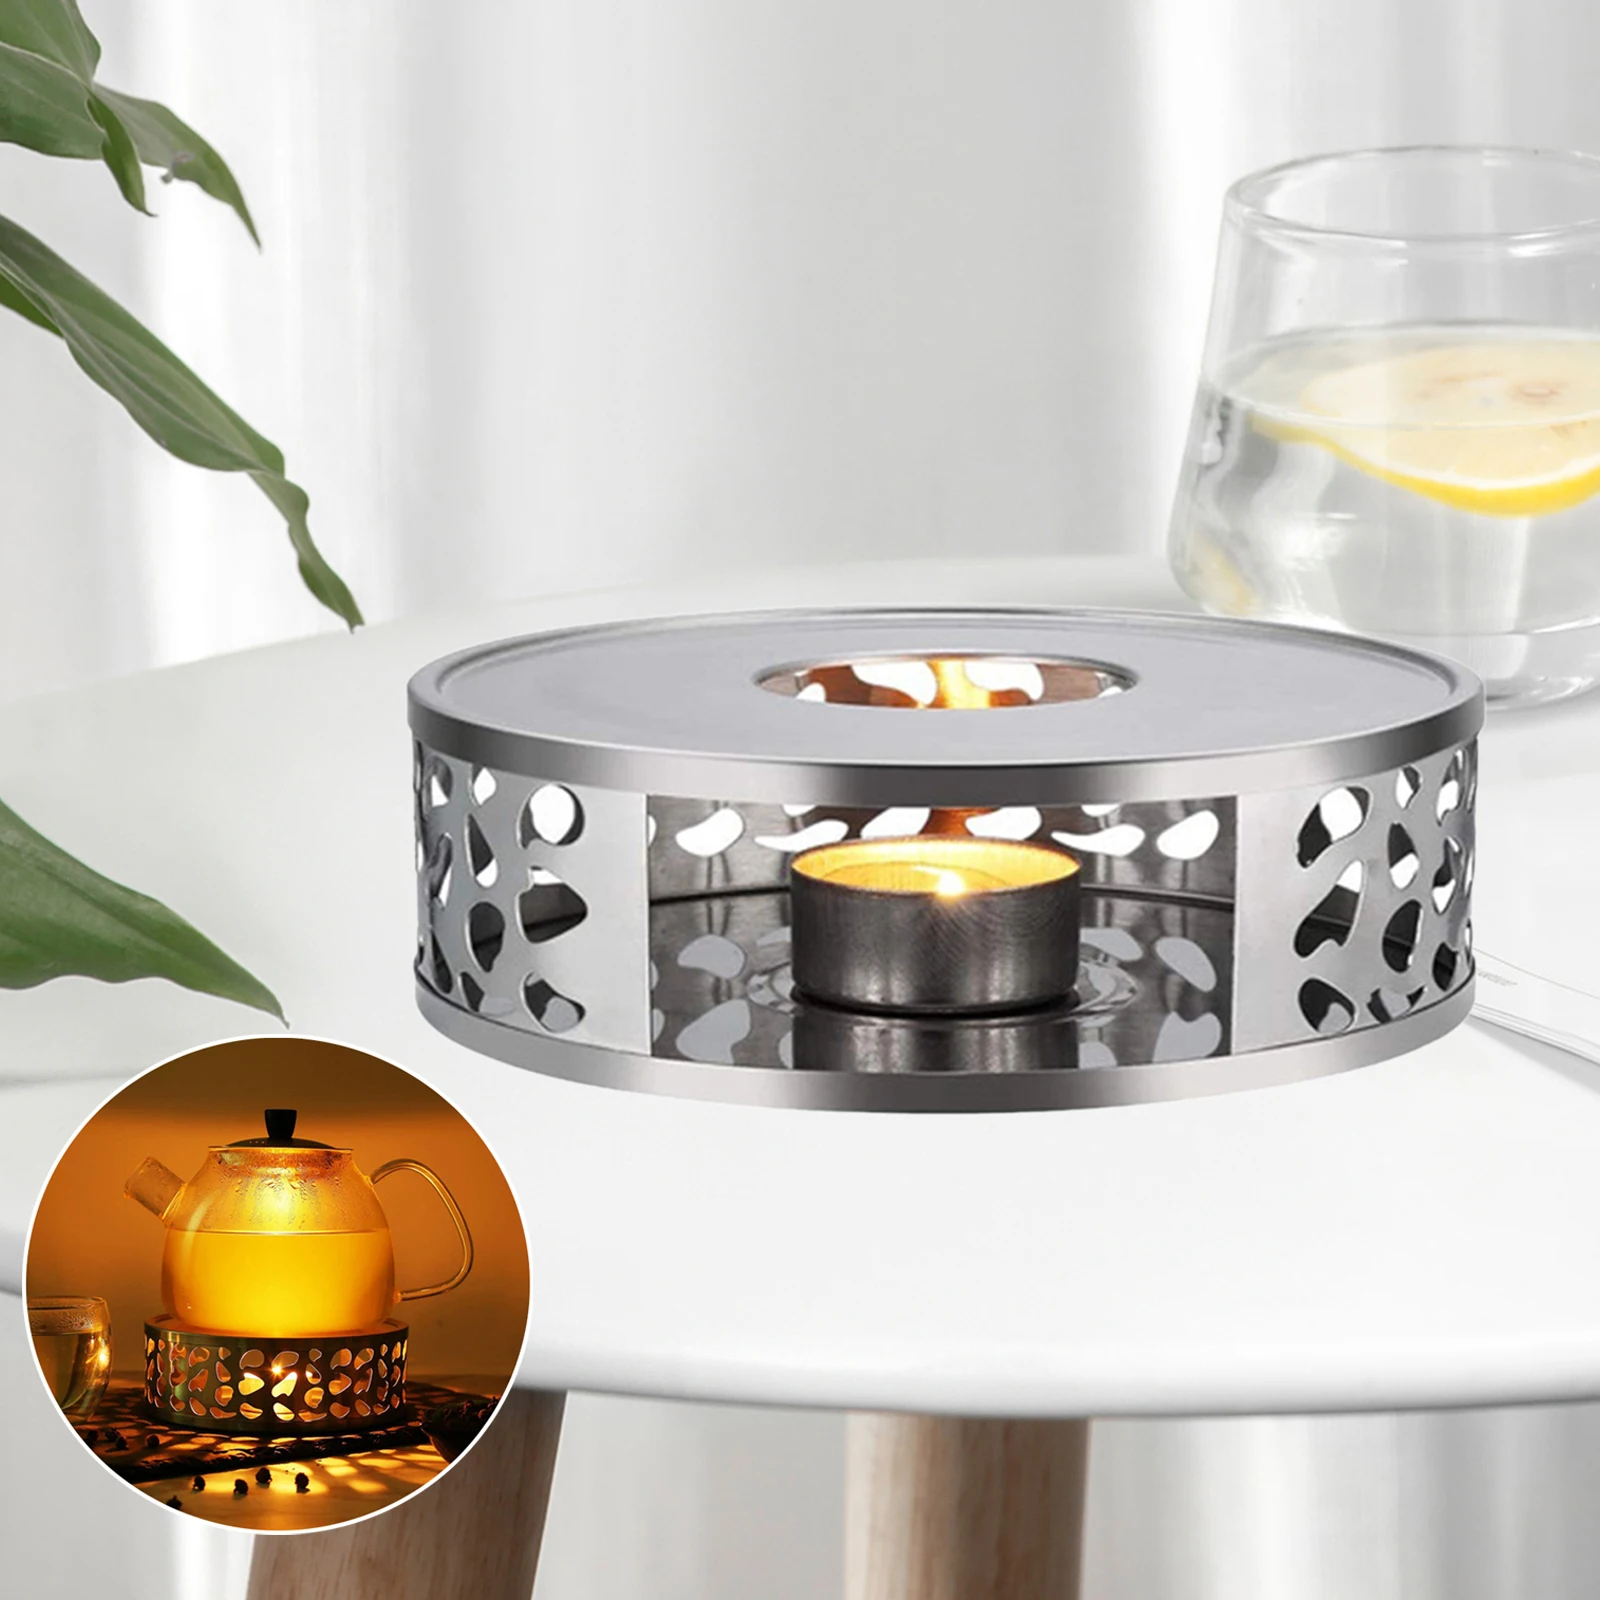 Candle Holders Glass Teapot Heating Base Stainless Steel Stove Tea Pot Candle Warmer Tea Accessories Tealight Holder Home Tools